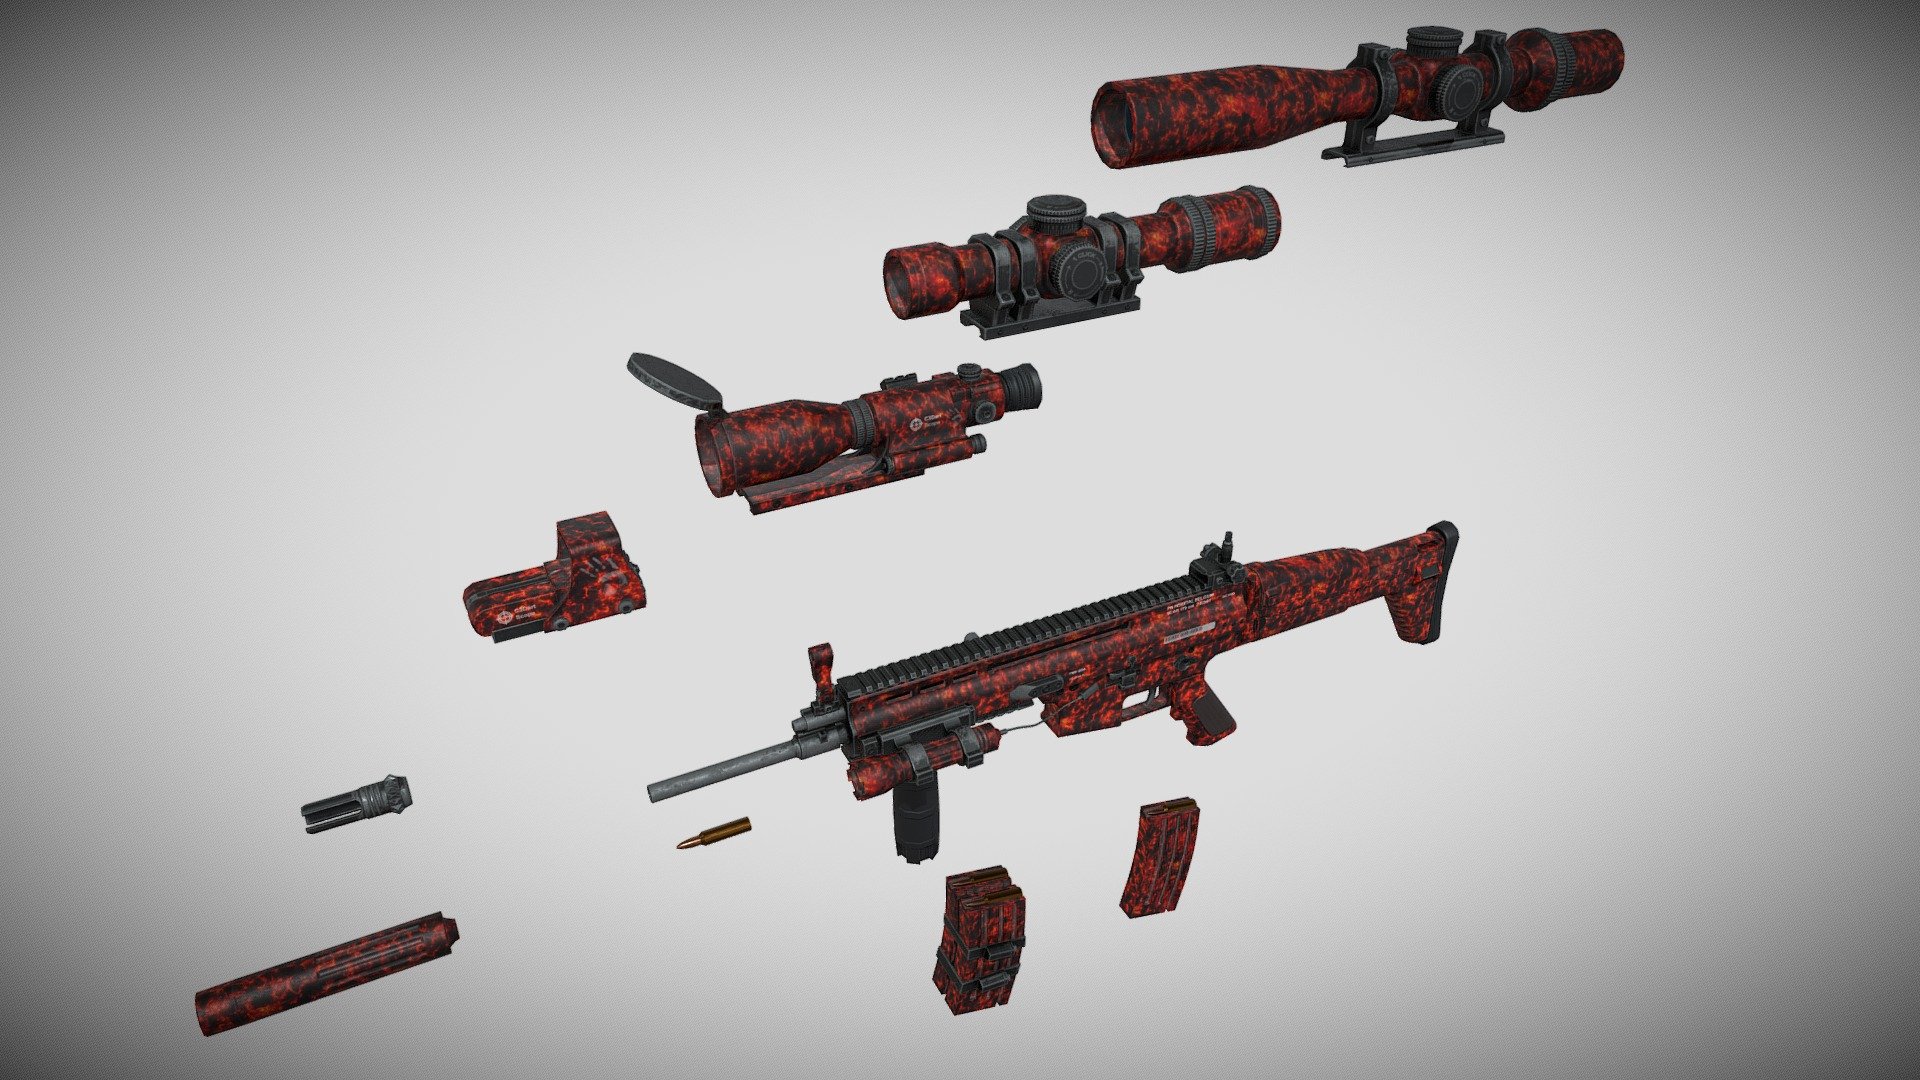 Main color: https://sketchfab.com/3d-models/scar-fn-lowpoly-main-color-7a48ab4054e44b568272ebcaff881231 Dragon skin: https://skfb.ly/6TsBQ Fire skin: https://skfb.ly/6TsDO Pirate skin: Winter skin: https://skfb.ly/6TsHw

Game Ready Scar FN mesh this package comes with: Weapon and 5 Scopes - Holographic sight - 4x scope - 8x scope - 16x scope - sight 1 Muzzle 1 Silencer 1 Flashlight 1 Grip 2 Magazines(single and double)

Textures: BaseColor Roughness Height Normal AO Metallic

All textures 4096 x 4096

Next gen model 3d model